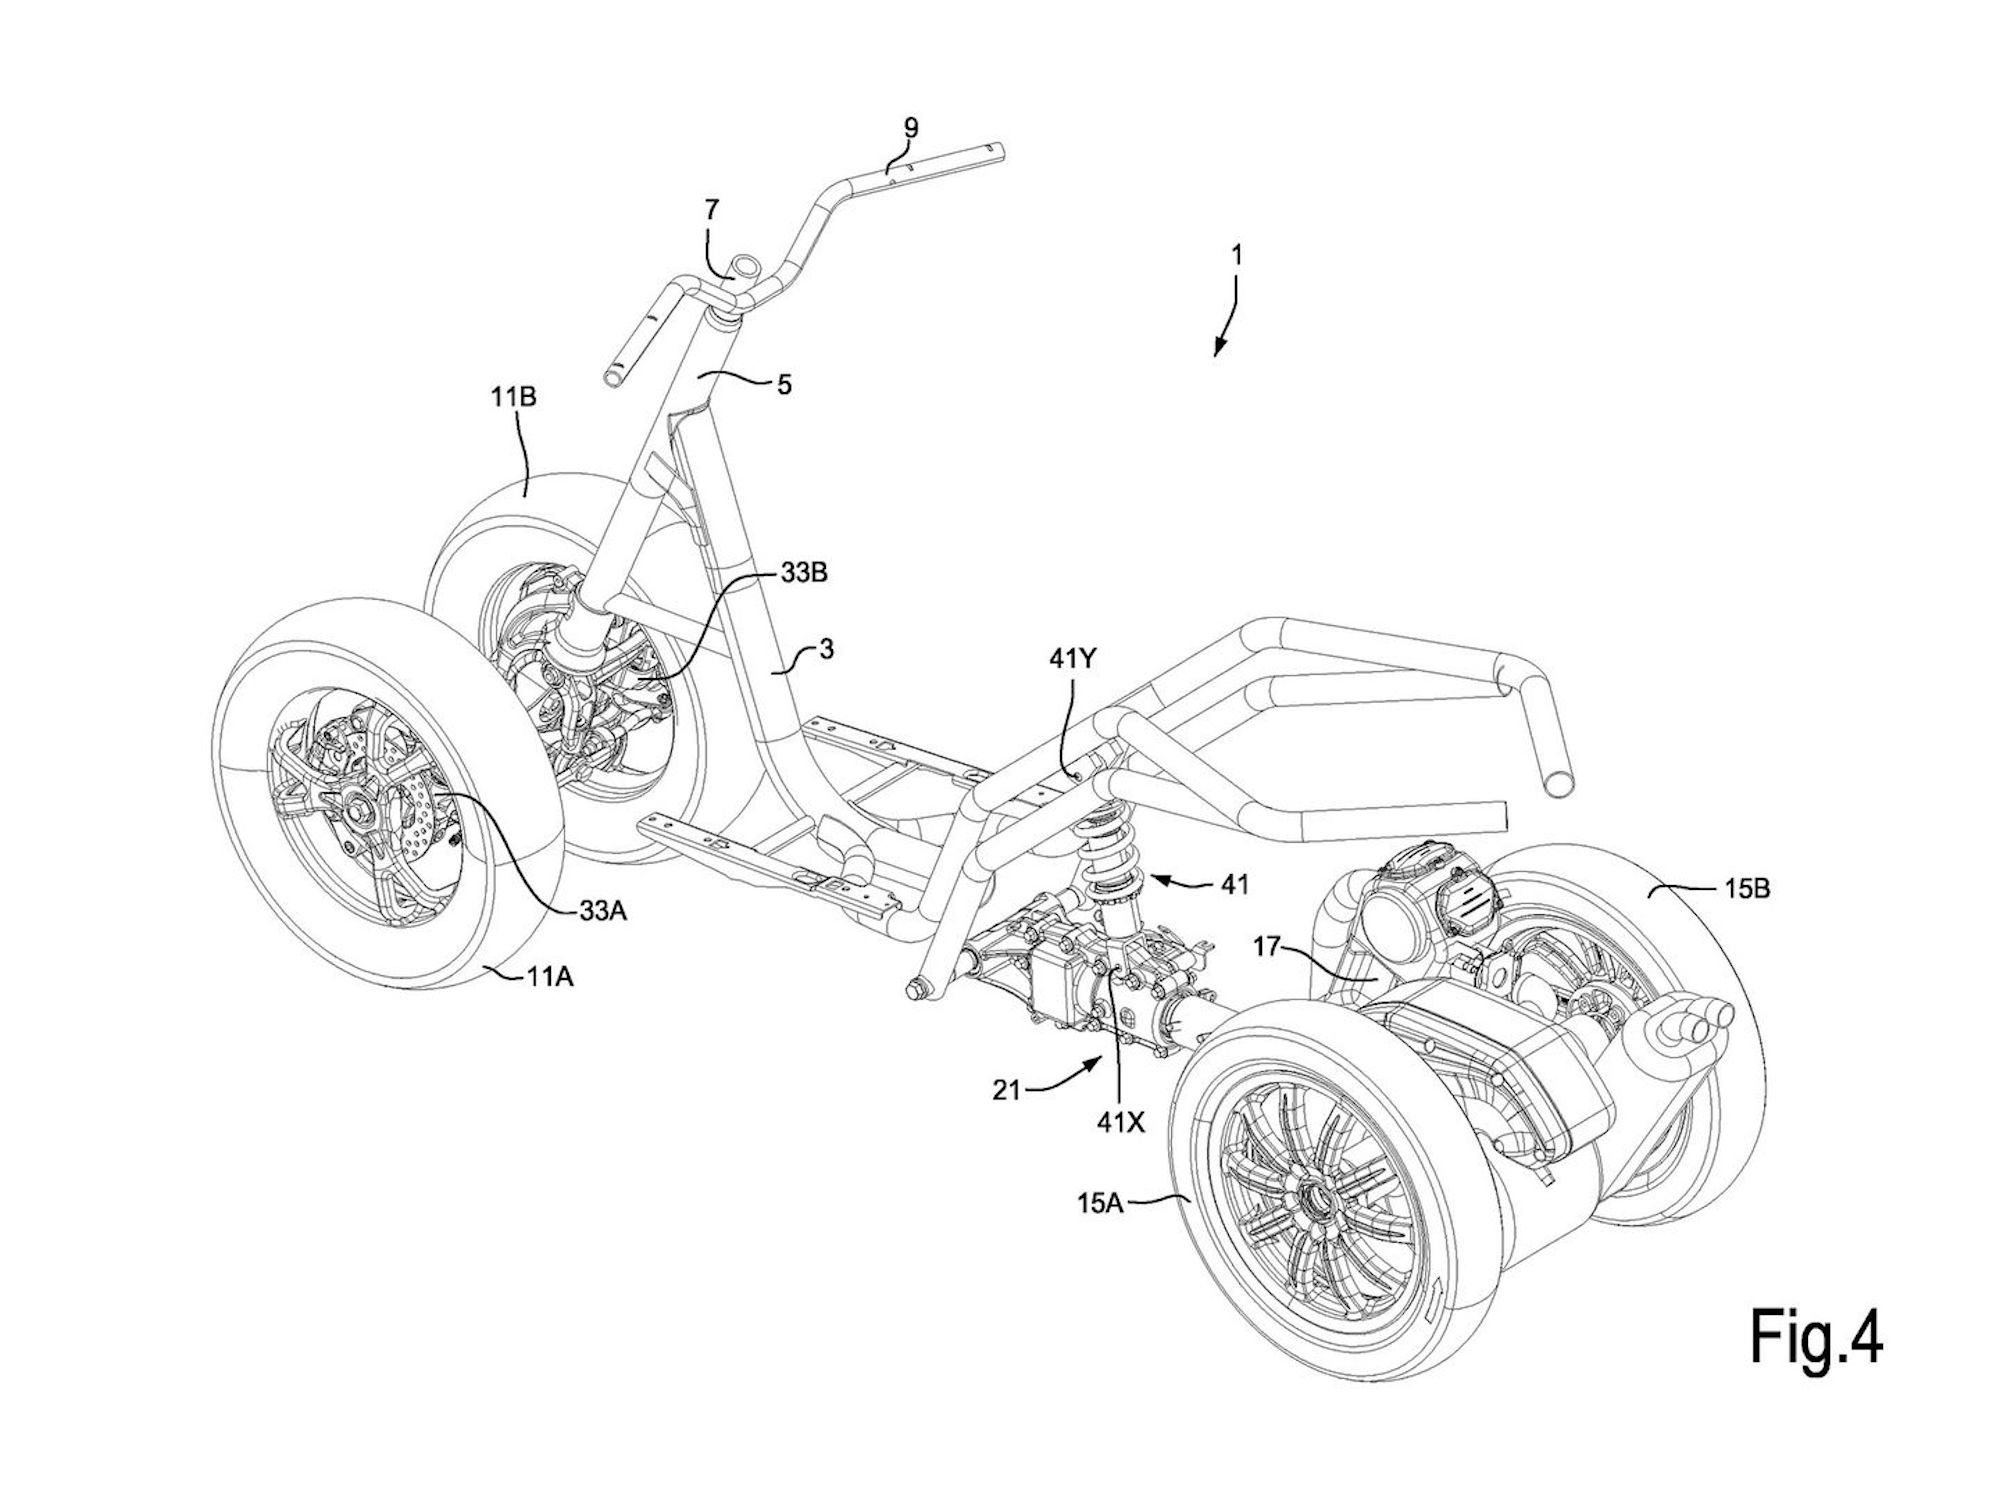 Piaggio's set of patents revealing a new four-wheeled leaner. Media sourced from CycleWorld.